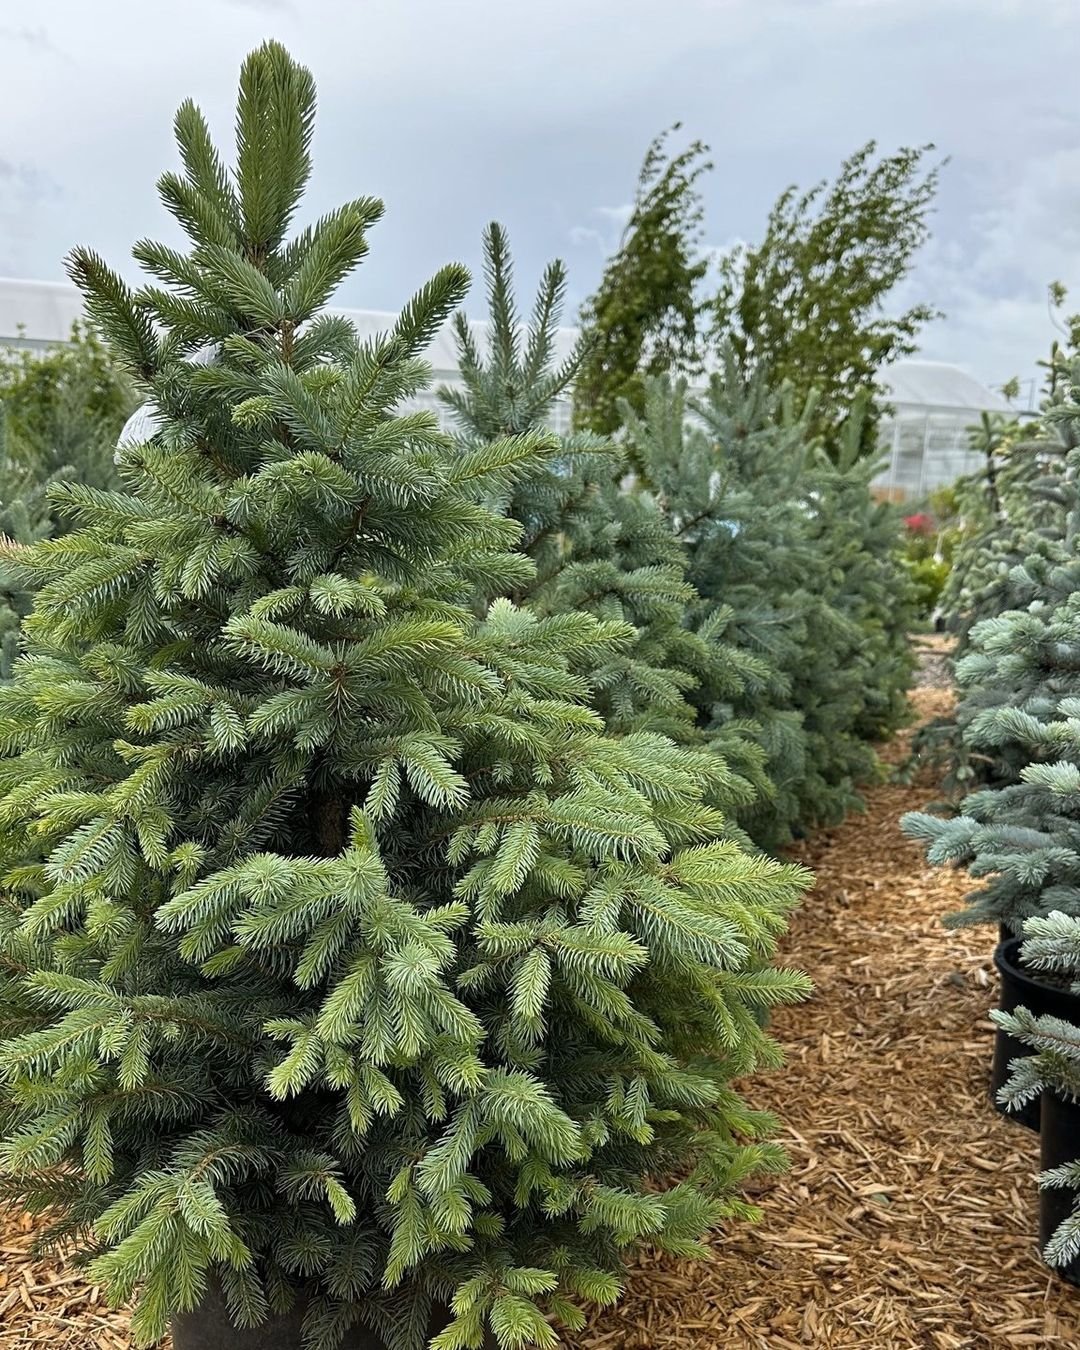 Spruce: The Evergreen Icon - A tall, majestic evergreen tree with dense foliage and a conical shape.

